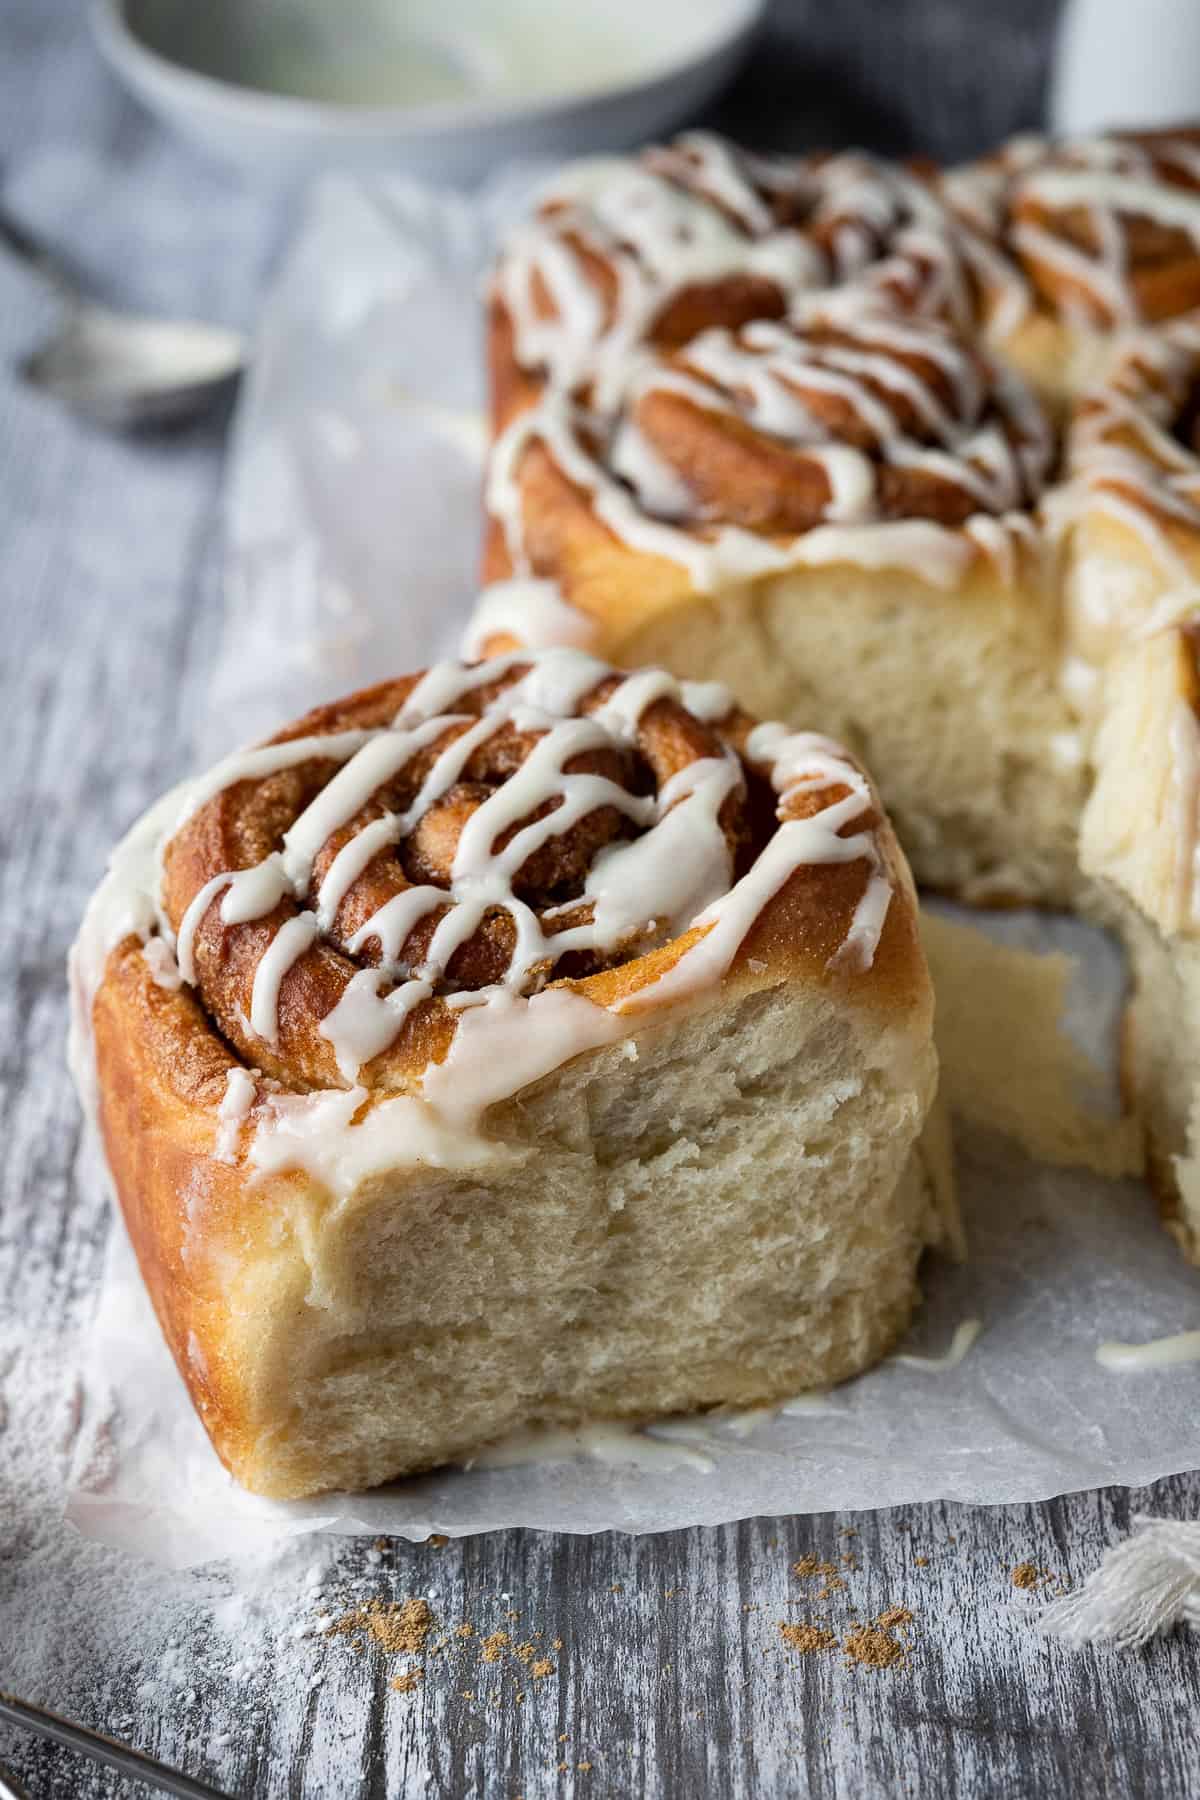 A vegan cinnamon roll on a wooden table.